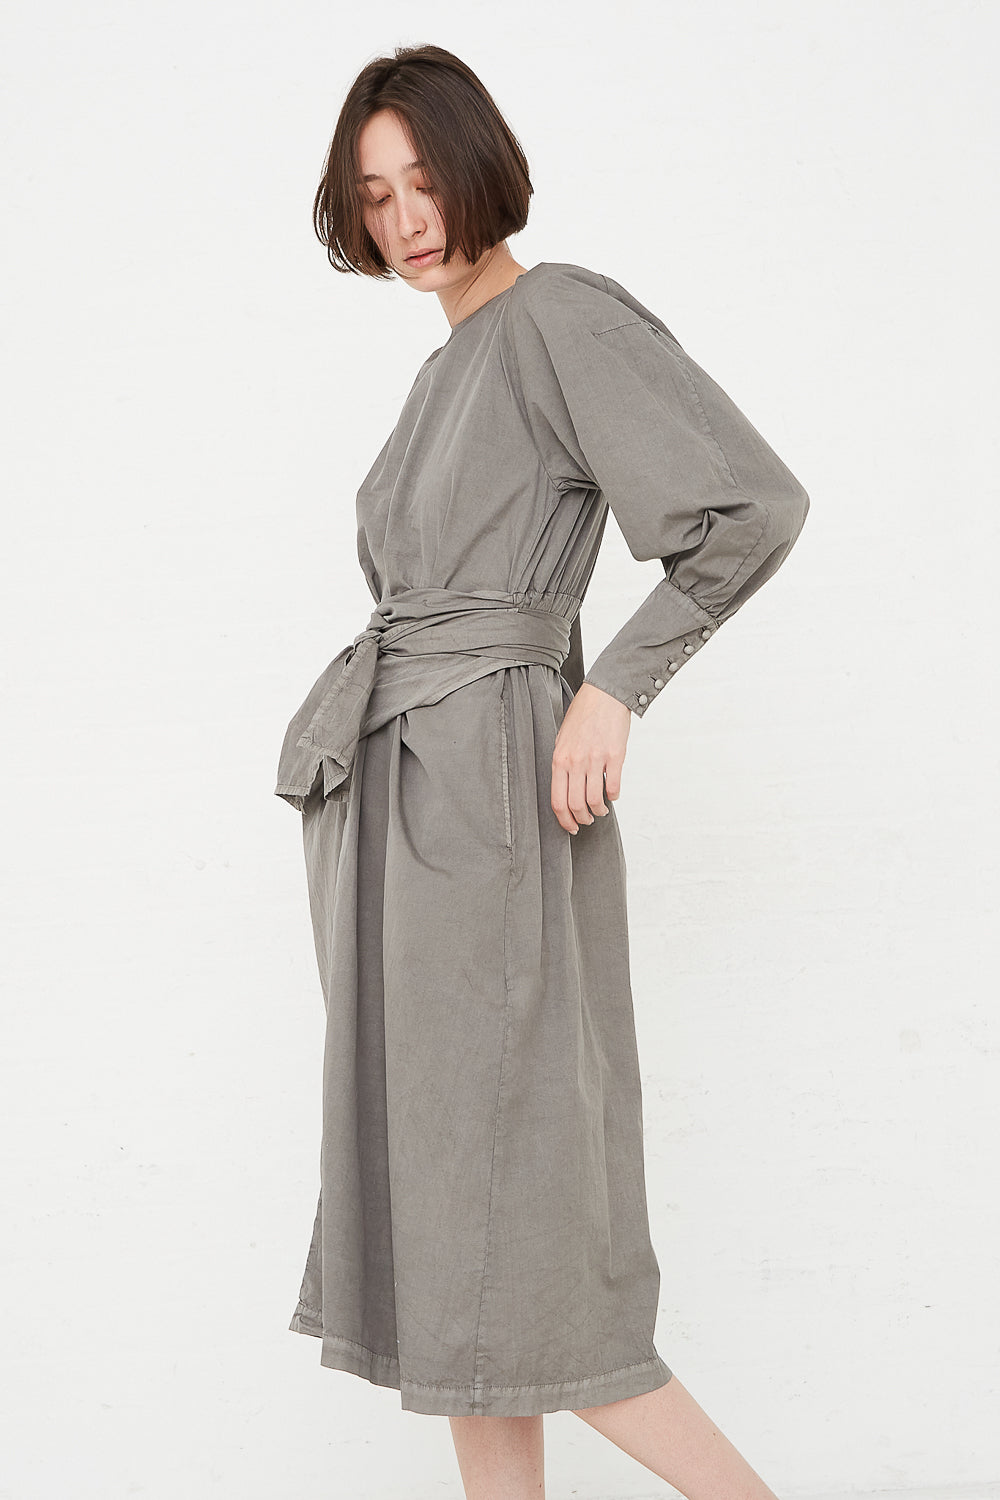 Cosmic Wonder - Suvin Cotton Broadcloth Wrapped Dress in Sumi side view